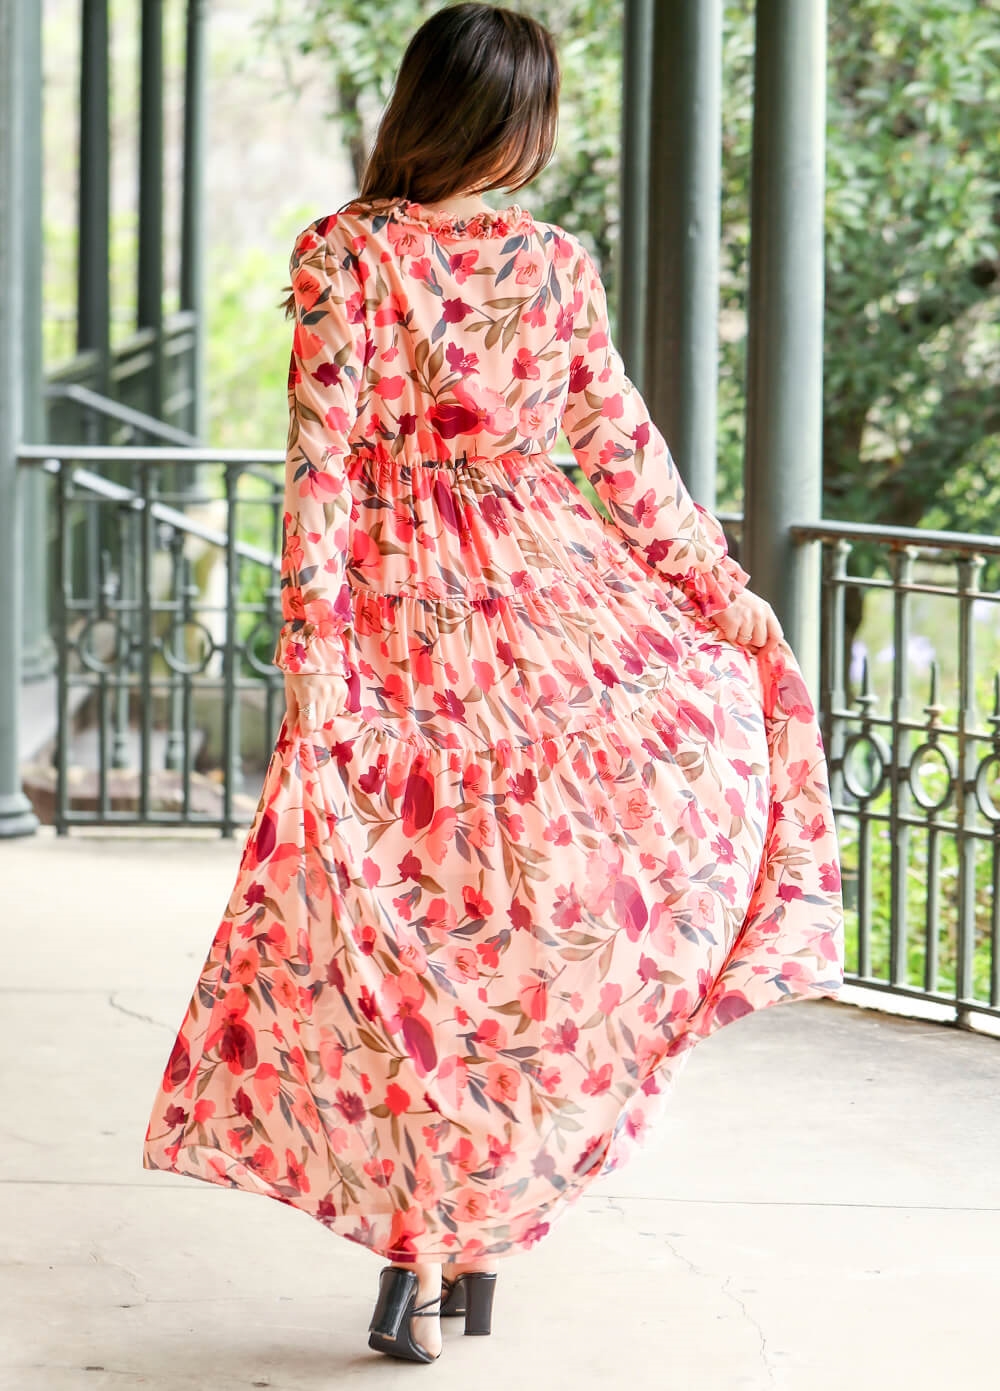 Lait & Co - Wanderlust Pink Floral Tiered Maternity Maxi Gown